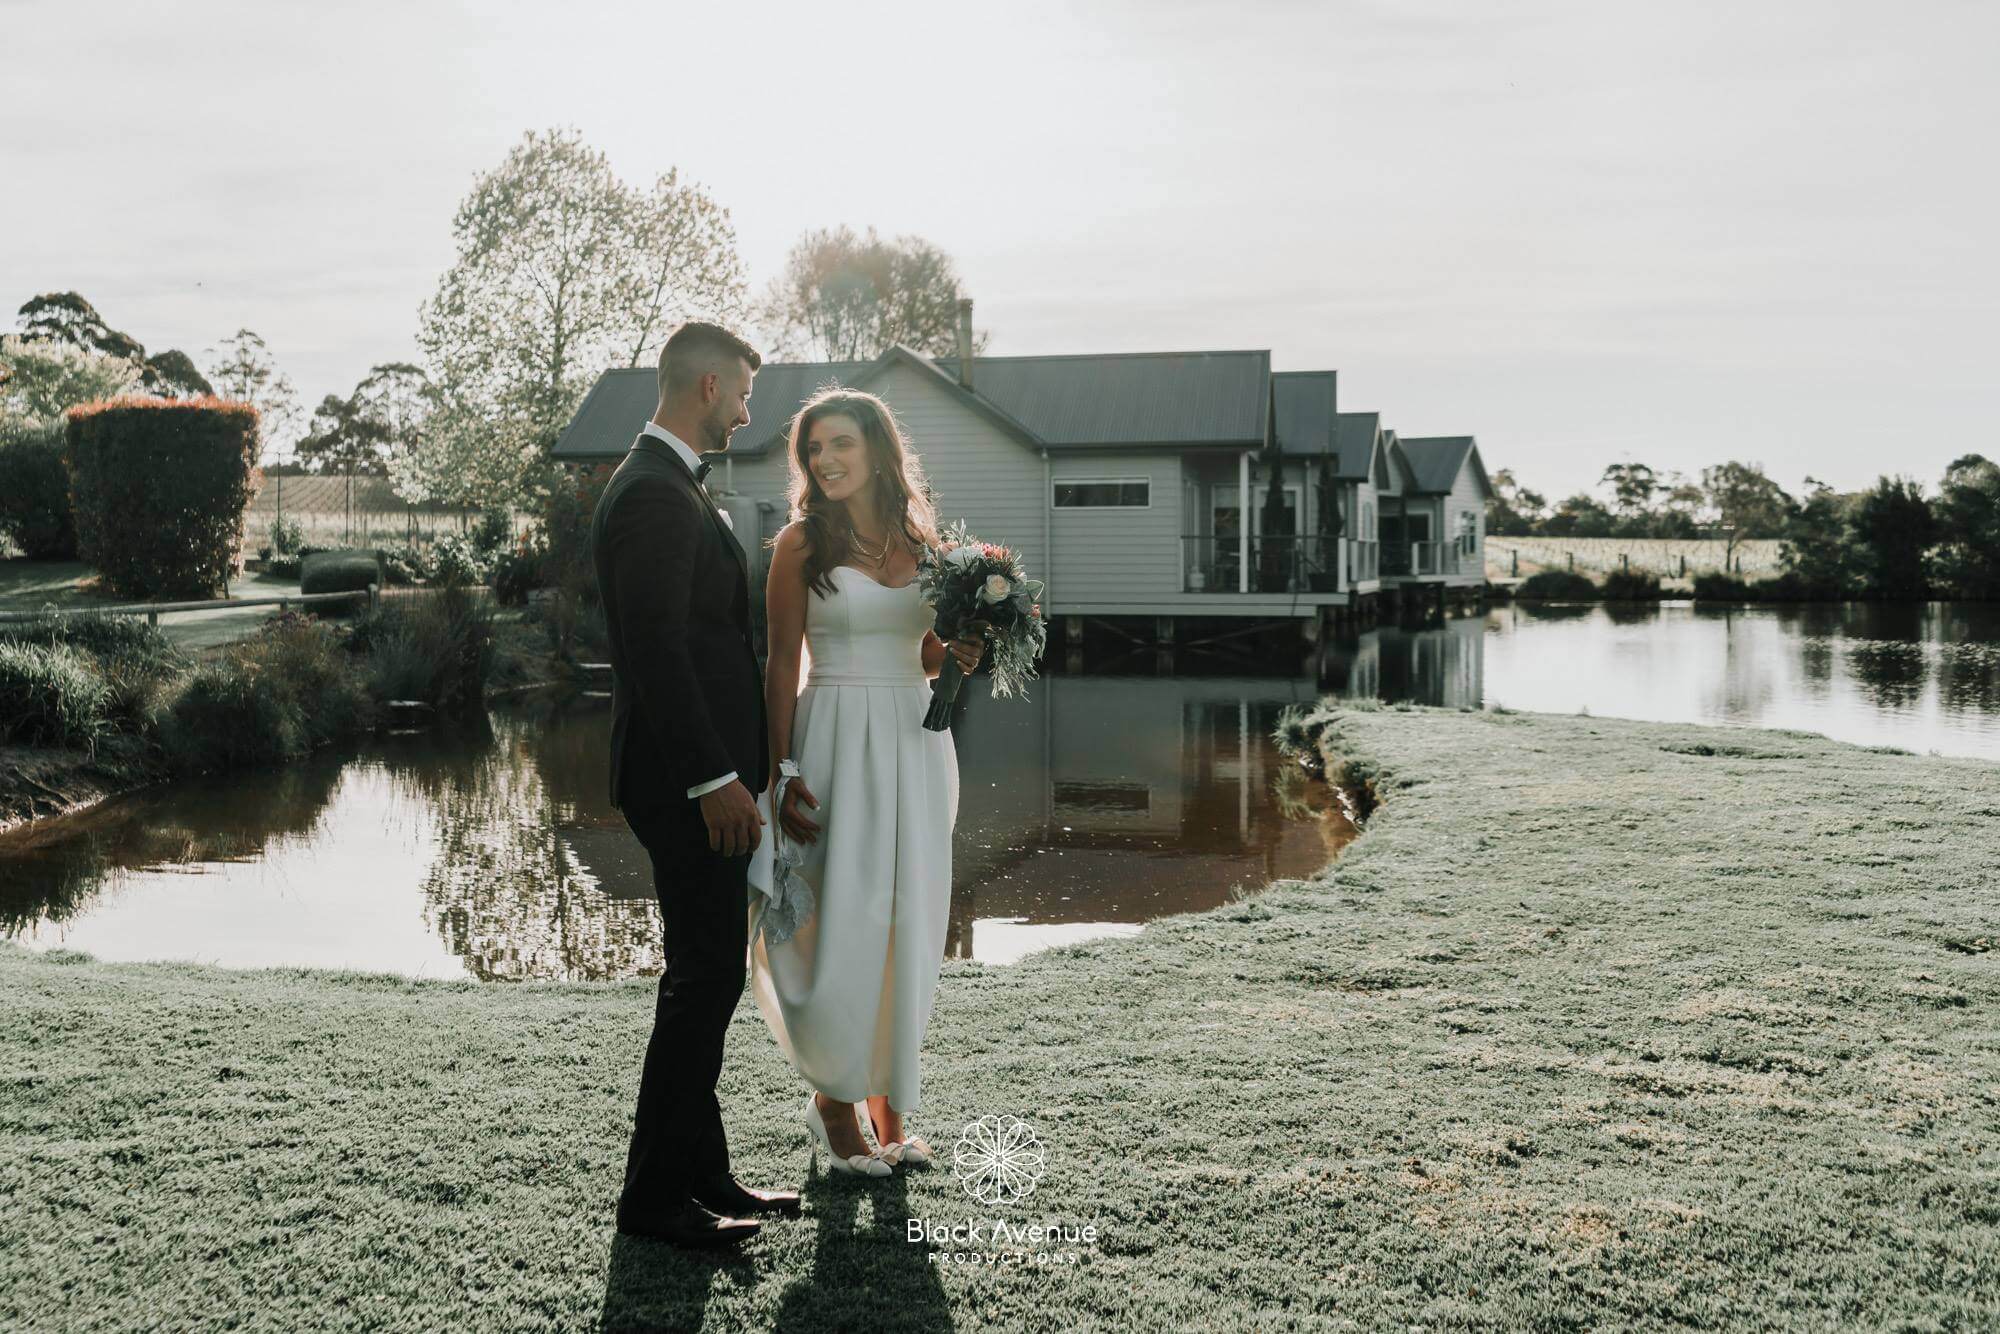 Bathed in the soft and warm light of the setting sun, the bride and groom stands side by side beside a pond